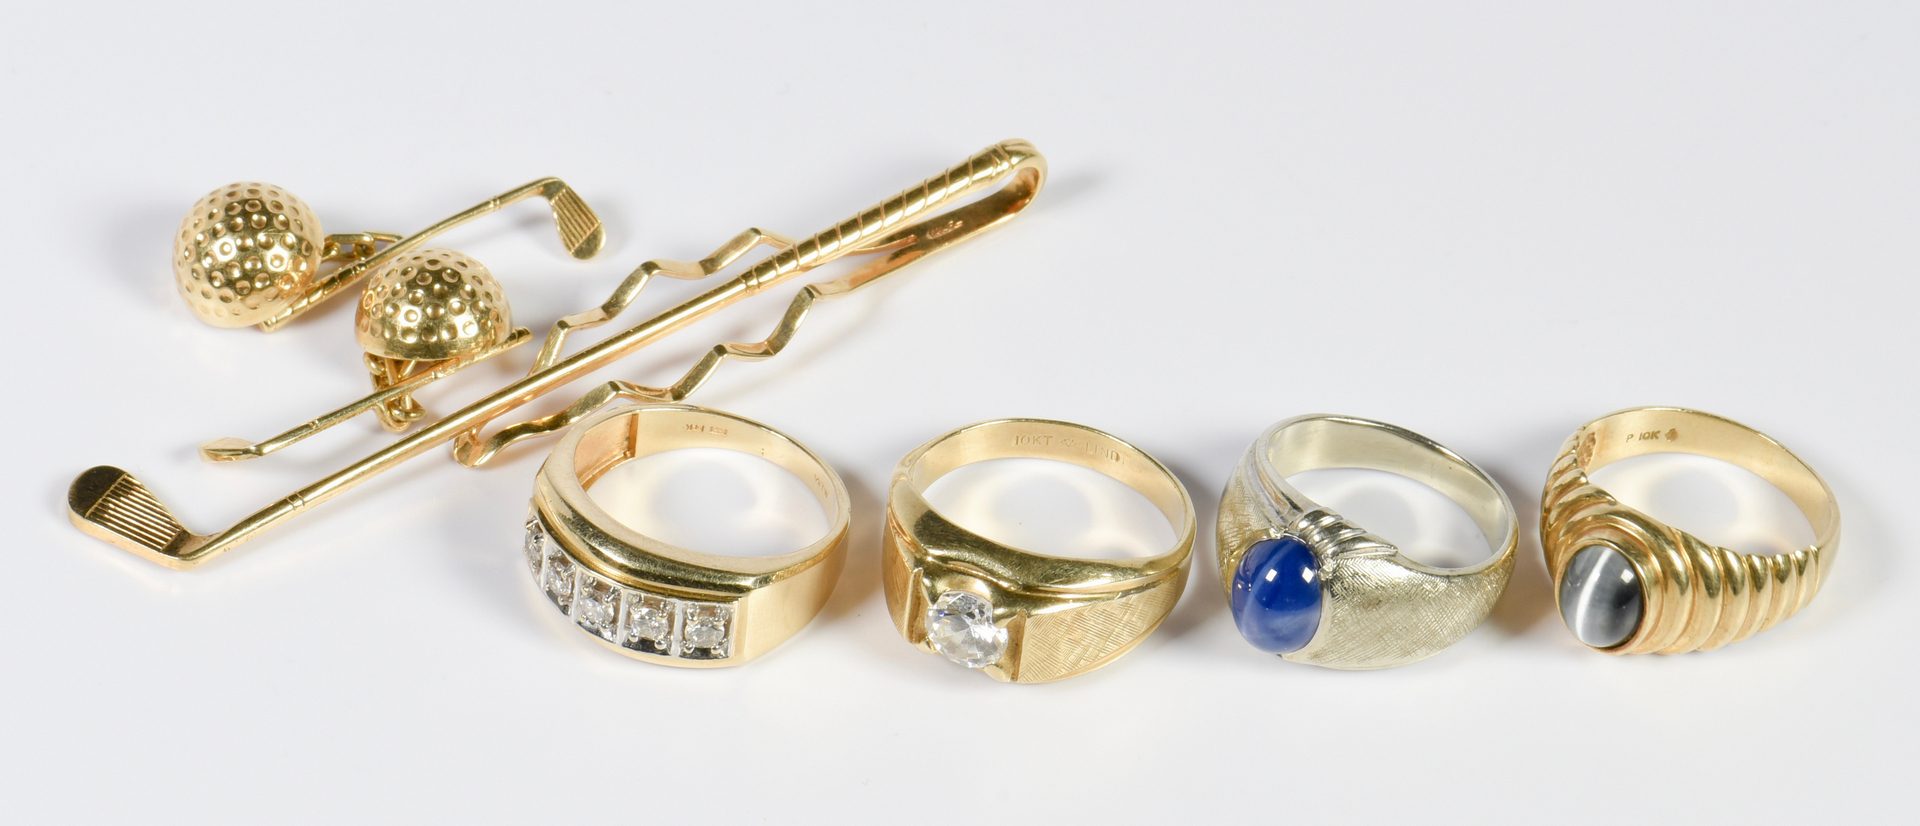 Lot 963: Gents Gold Rings and Cufflinks, 6 items